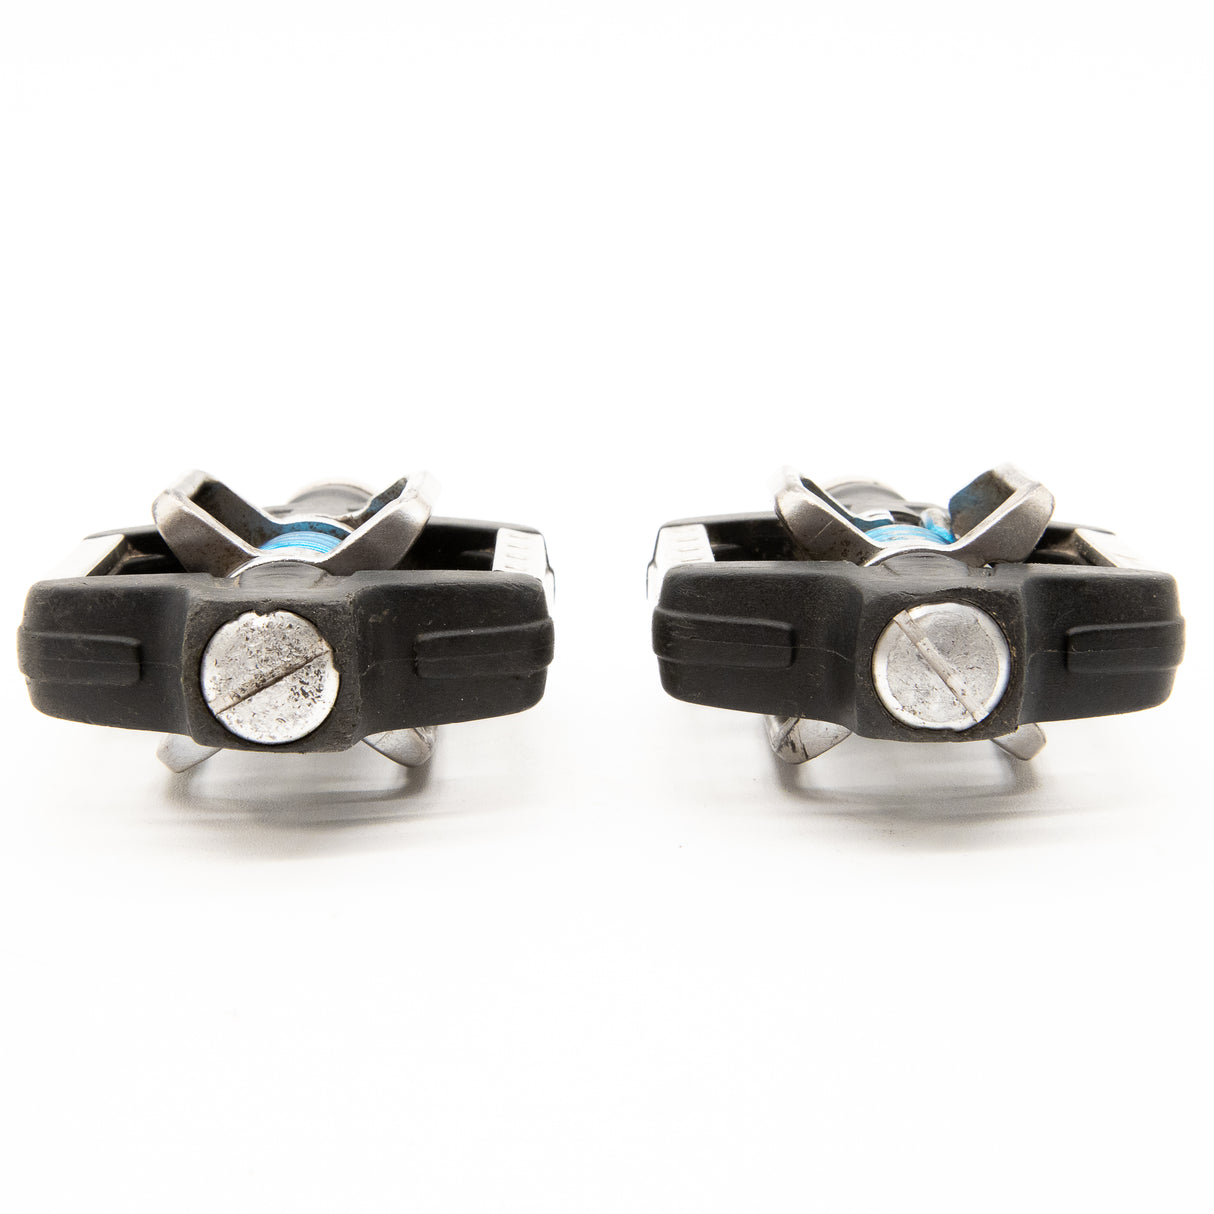 Crank Brothers Candy SL Clipless MTB Pedals 298g